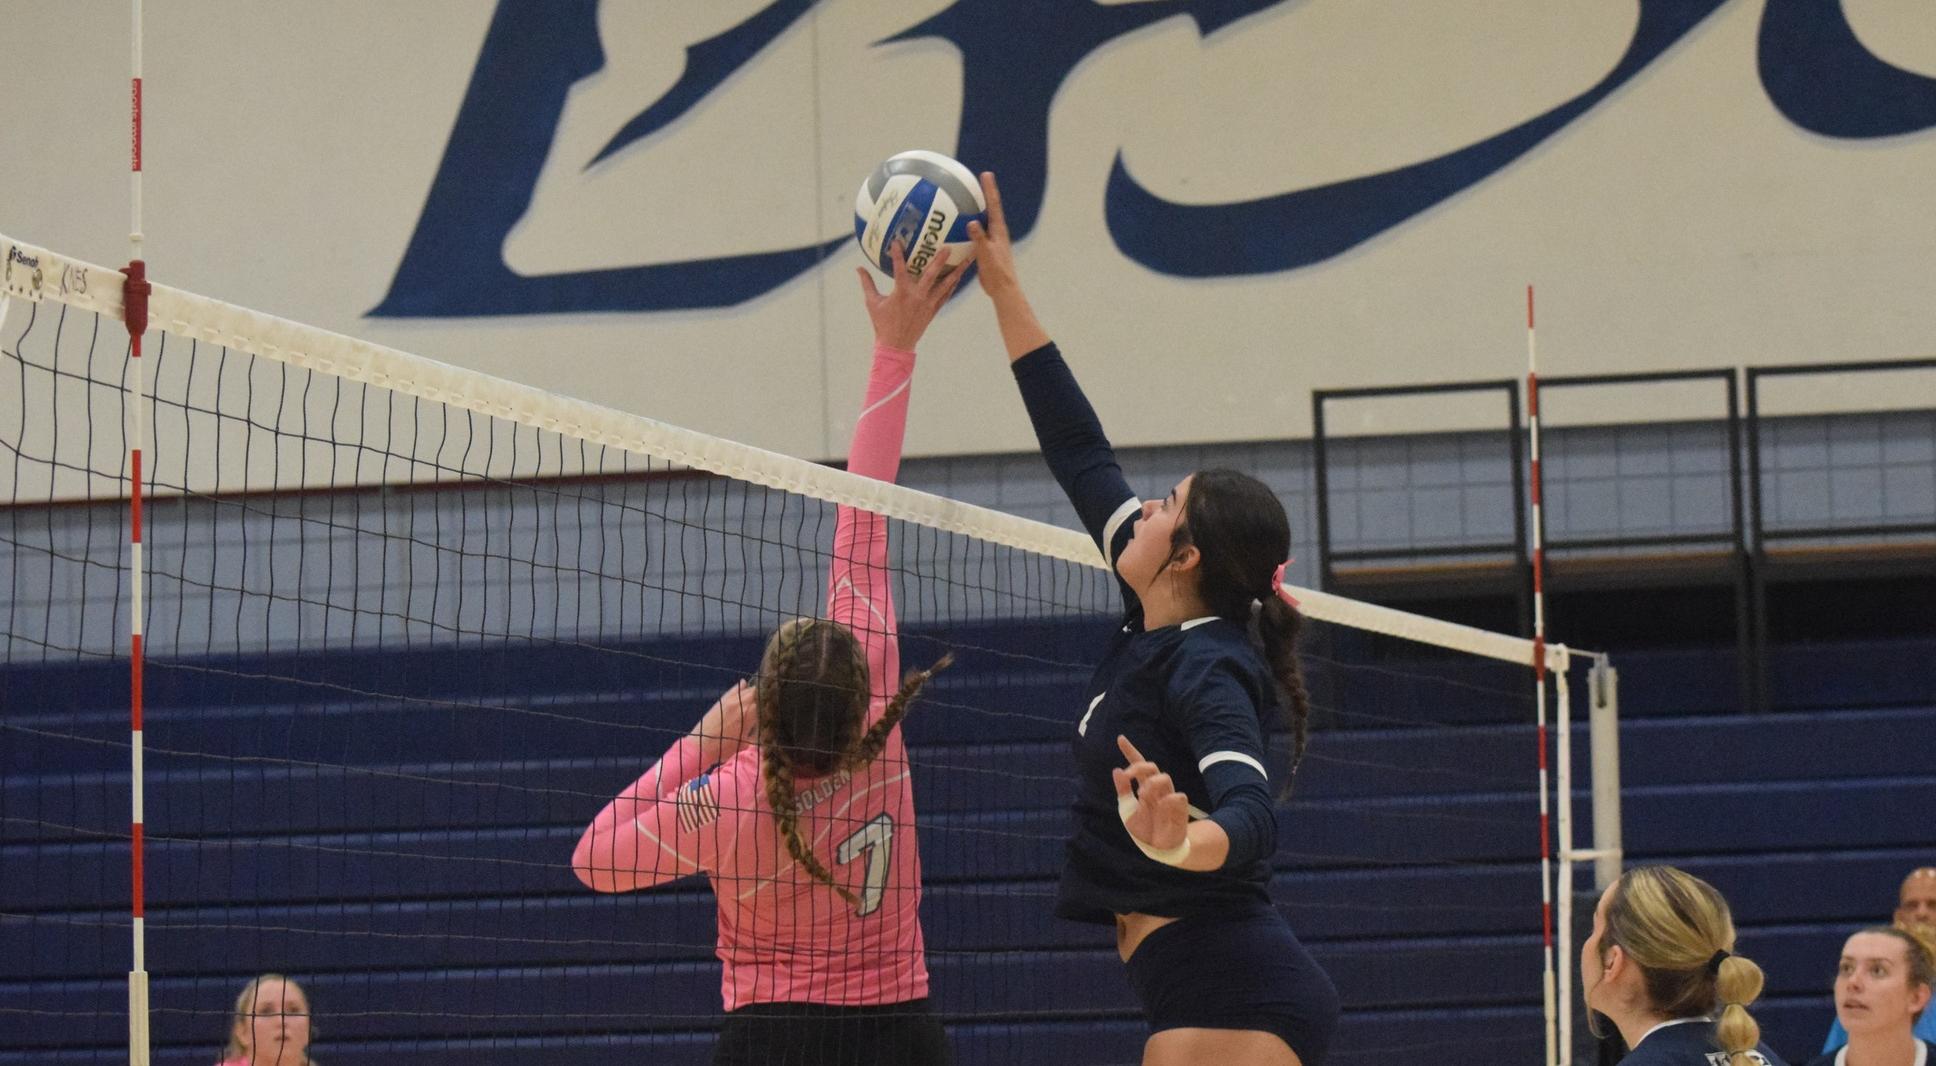 Women's volleyball team stays in first place with win over GWC